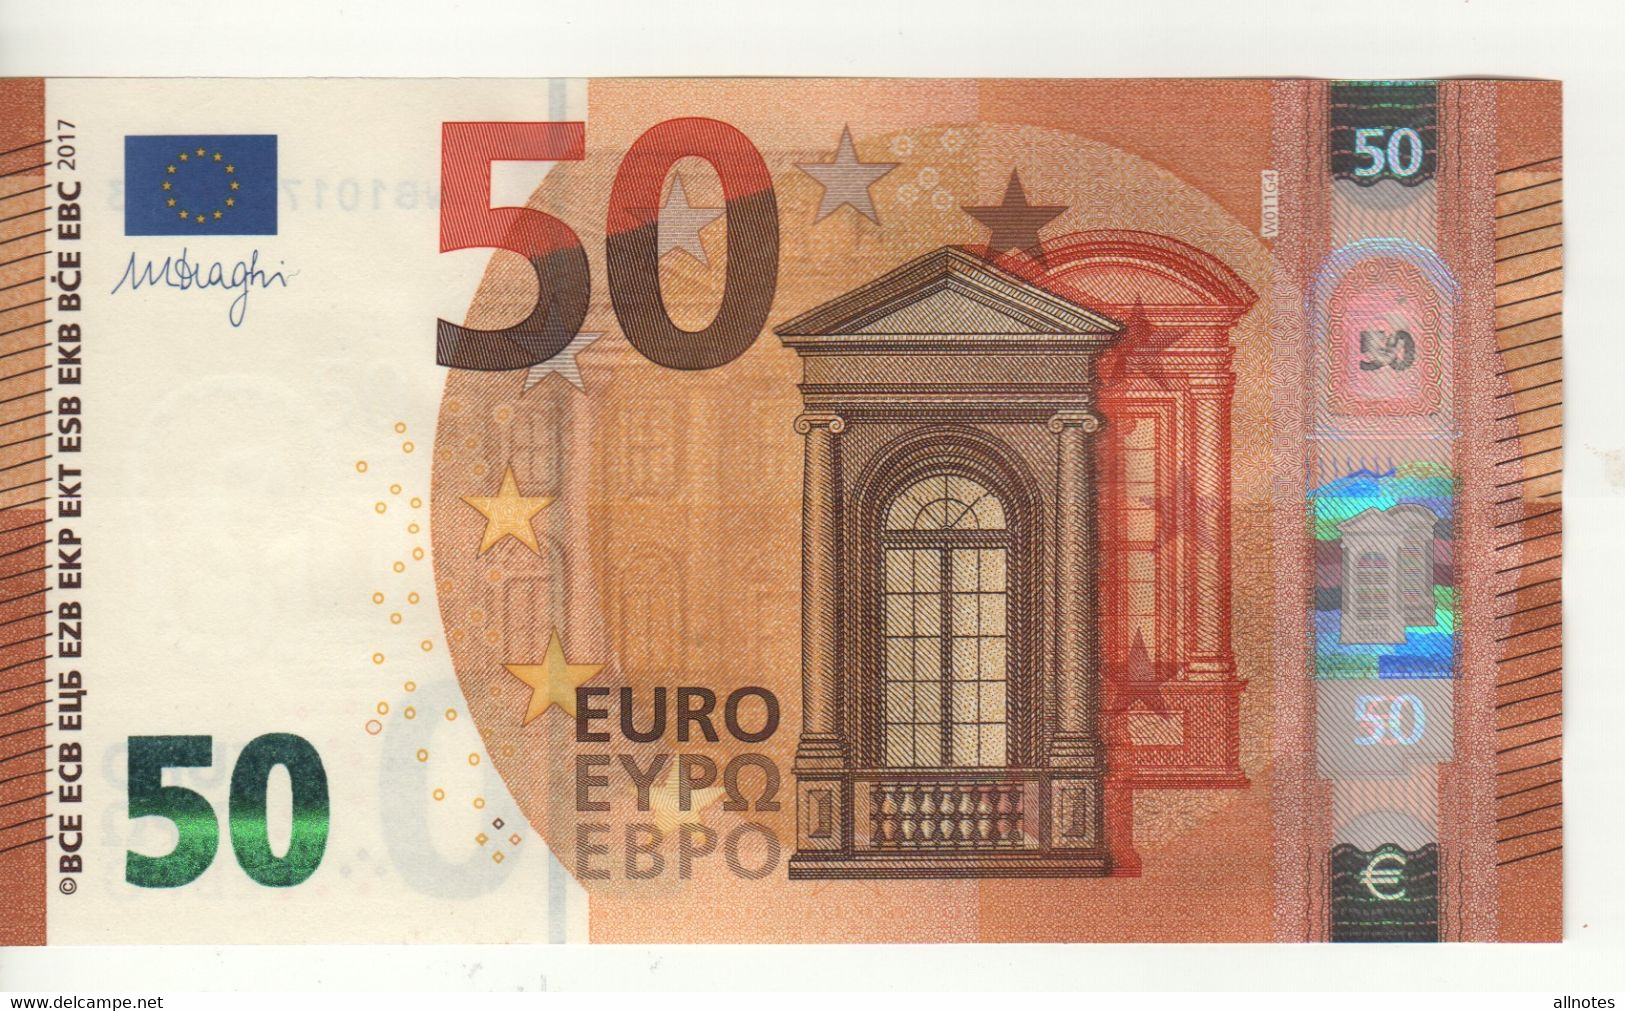 50 EURO  "Germany"  DRAGHI   W 011 G4    WB1017226998  / FDS - UNC - 50 Euro